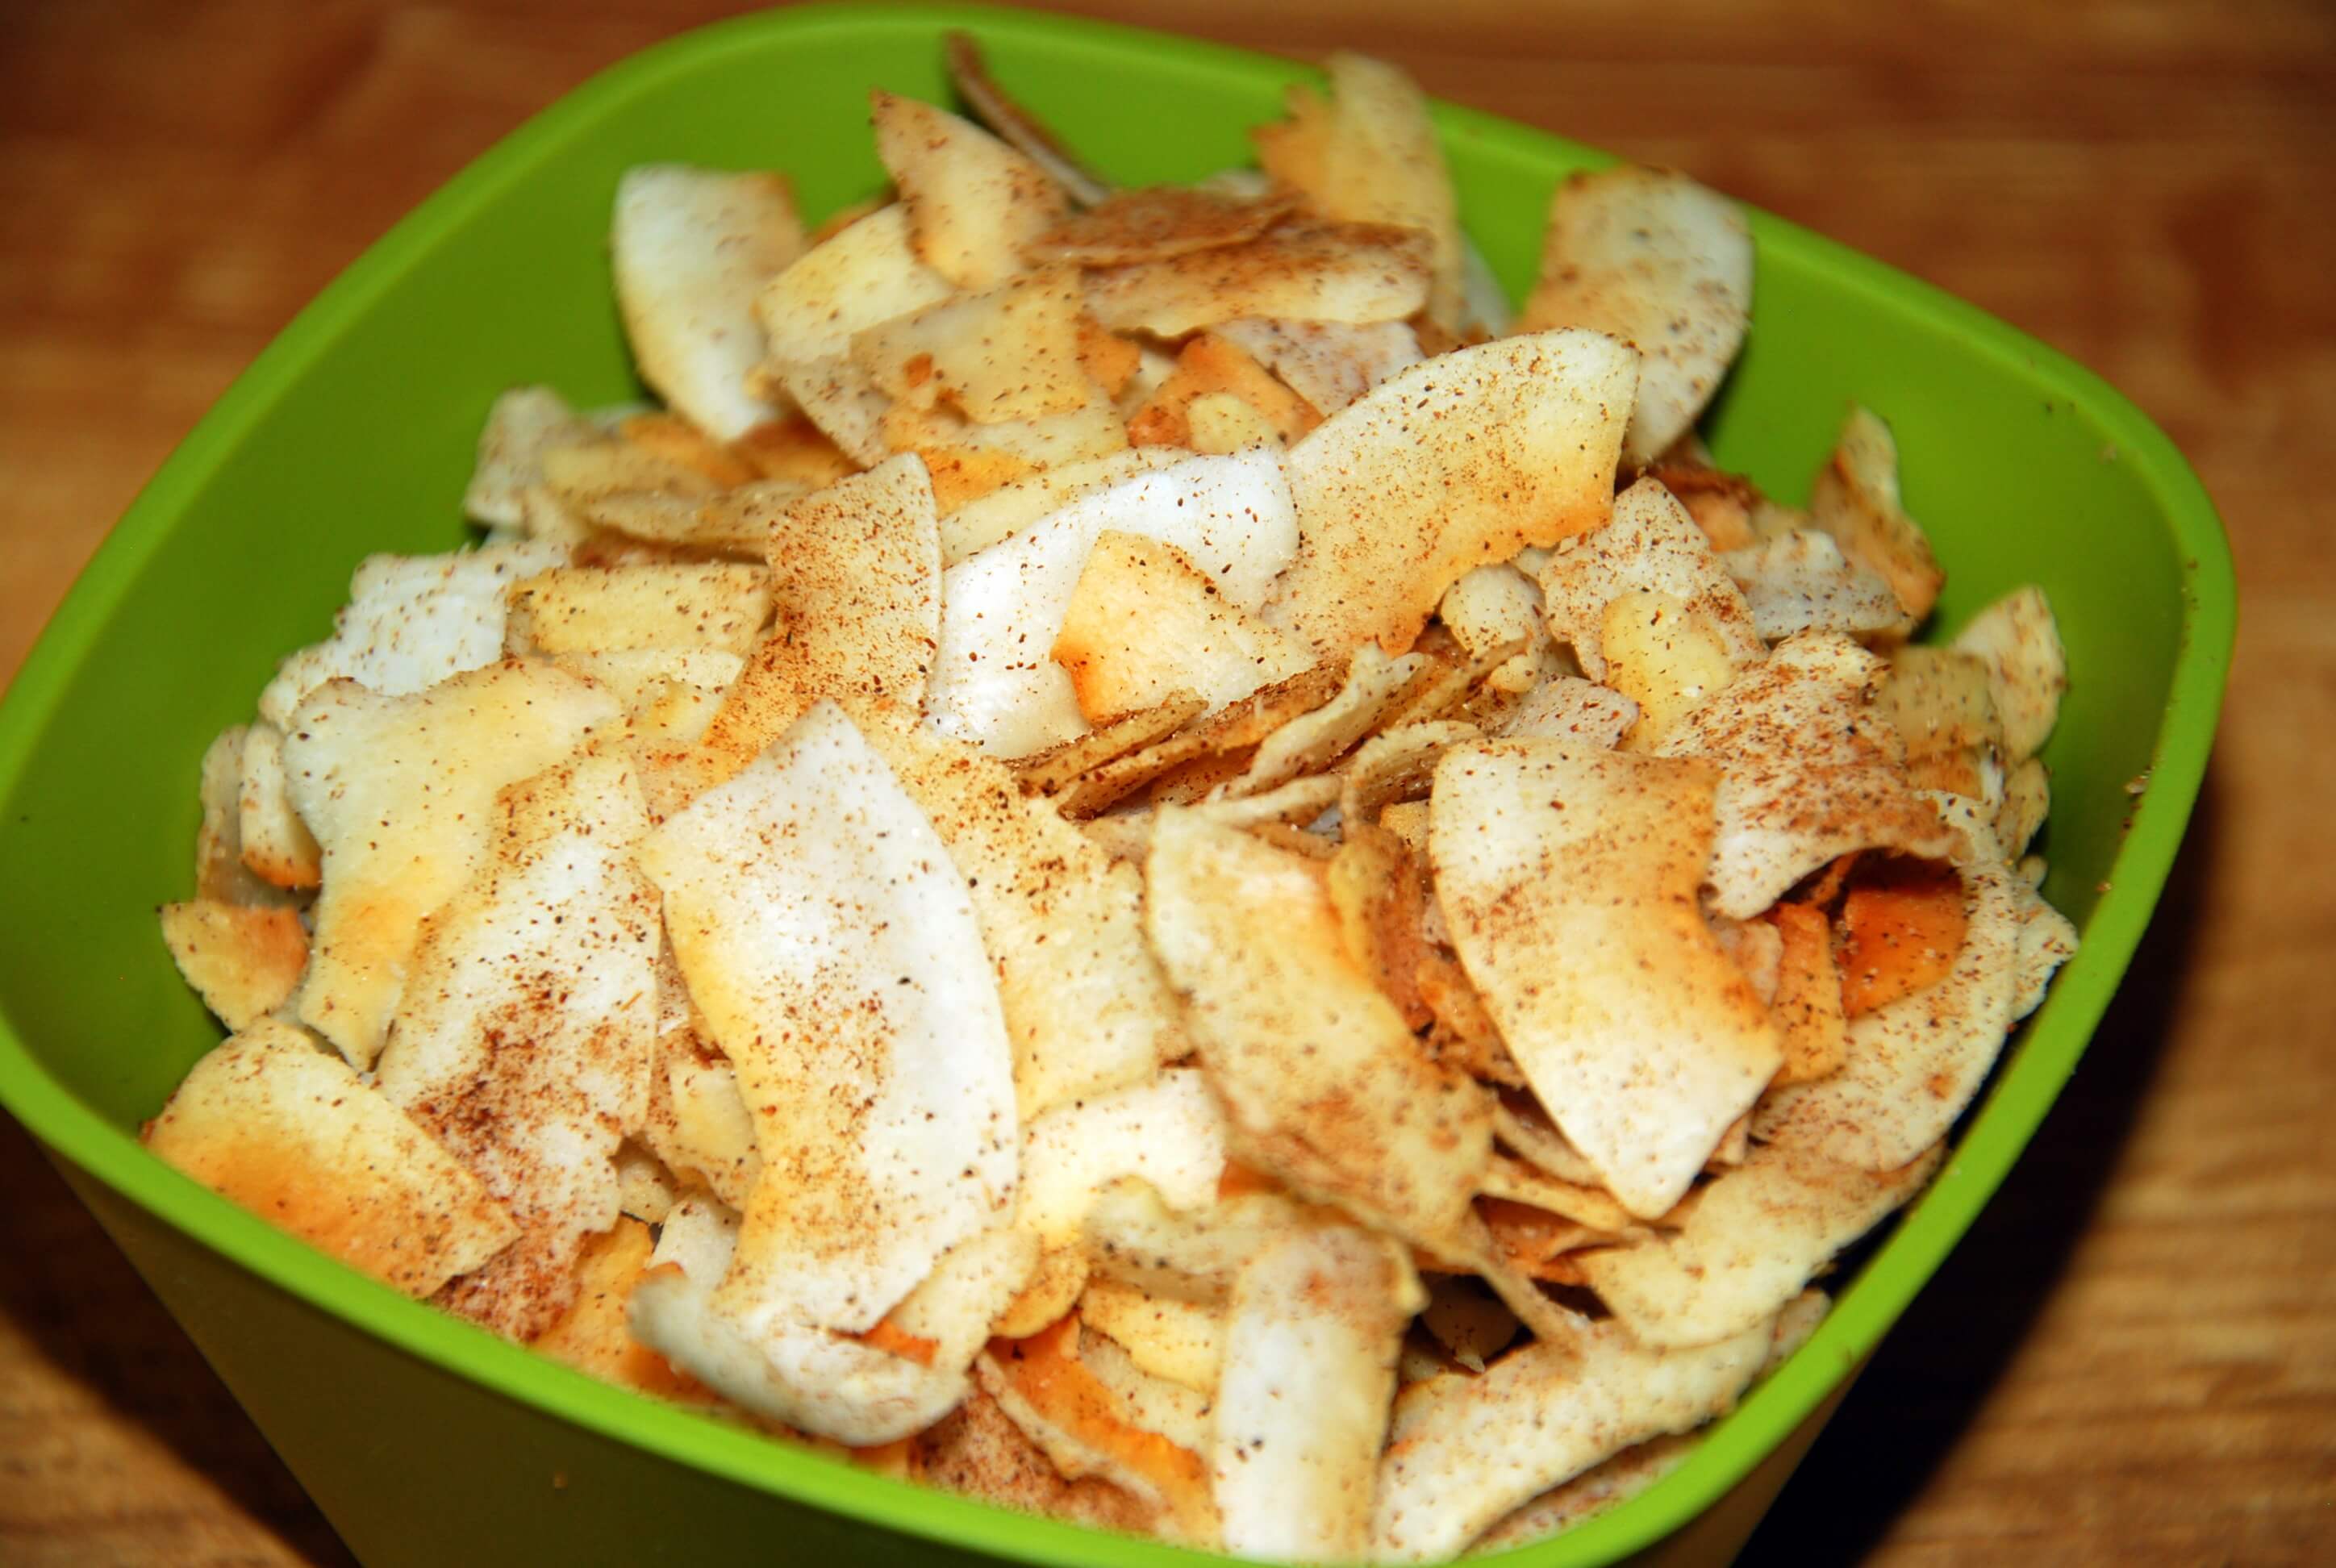 Caramelized Coconut Chips (a.k.a. Salty Cinnamon Goodness)